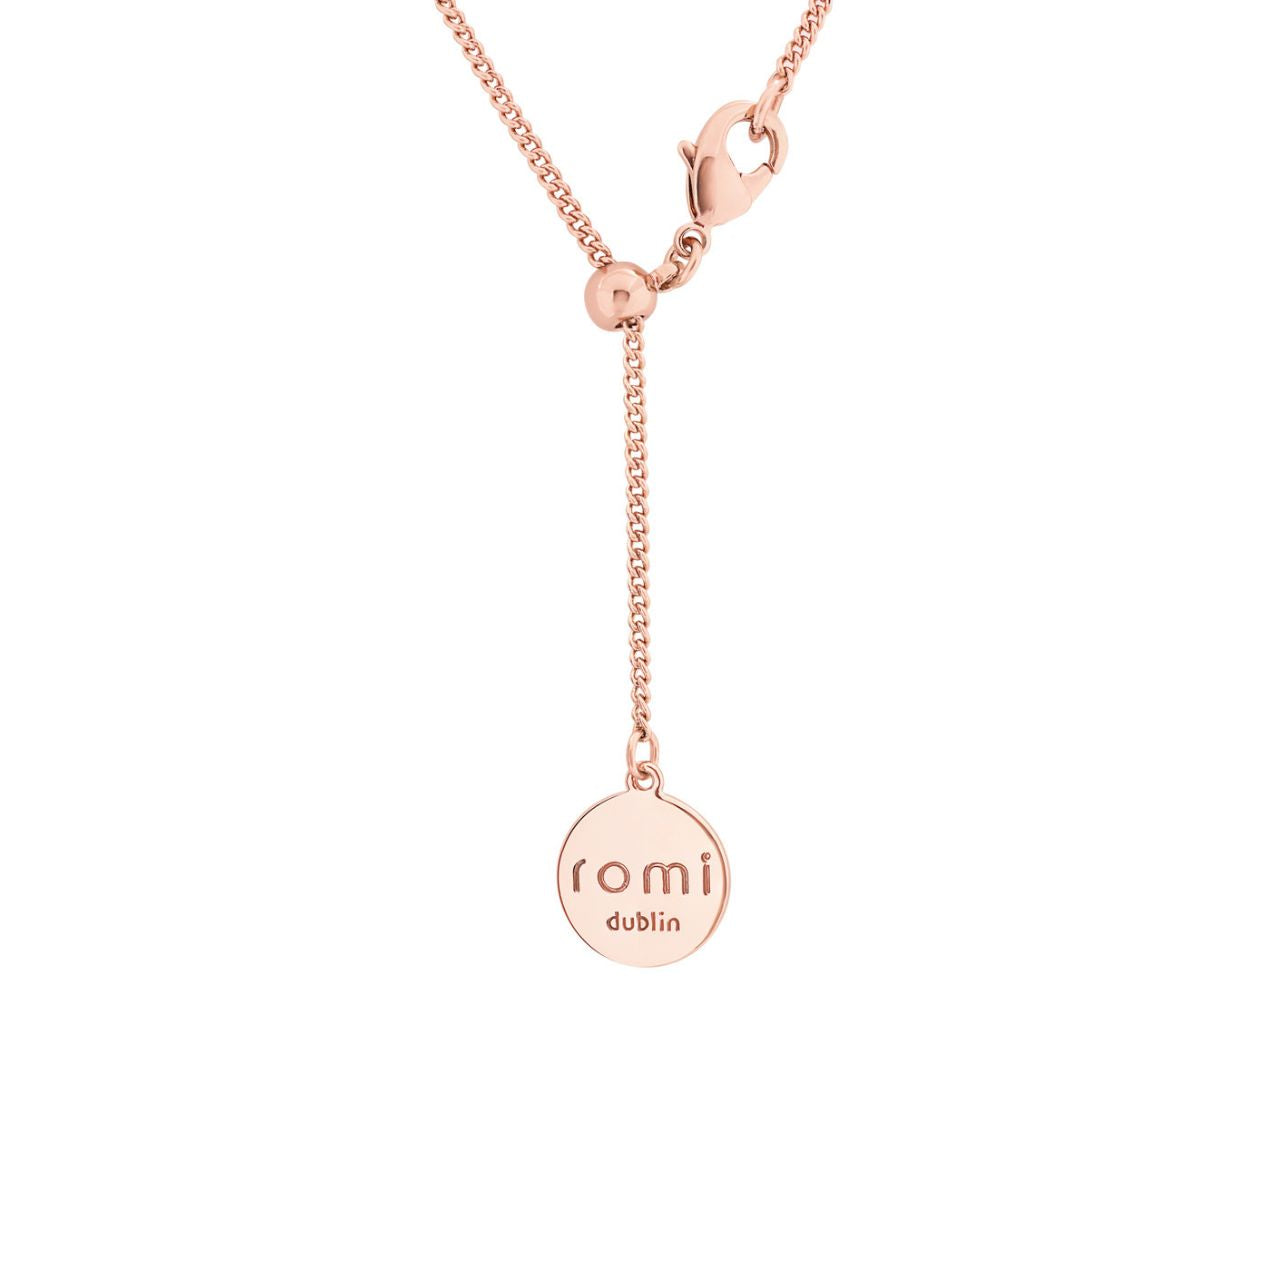 Romi Dublin Rose Gold Padlock Heart Pendant  Inspired by the love in relationships. Each piece from our collection represents commitment and connection. They are the perfect gift that symbolically strengthens a promise, being from friendship or romantic love. There is an individual story behind every love padlock jewel.